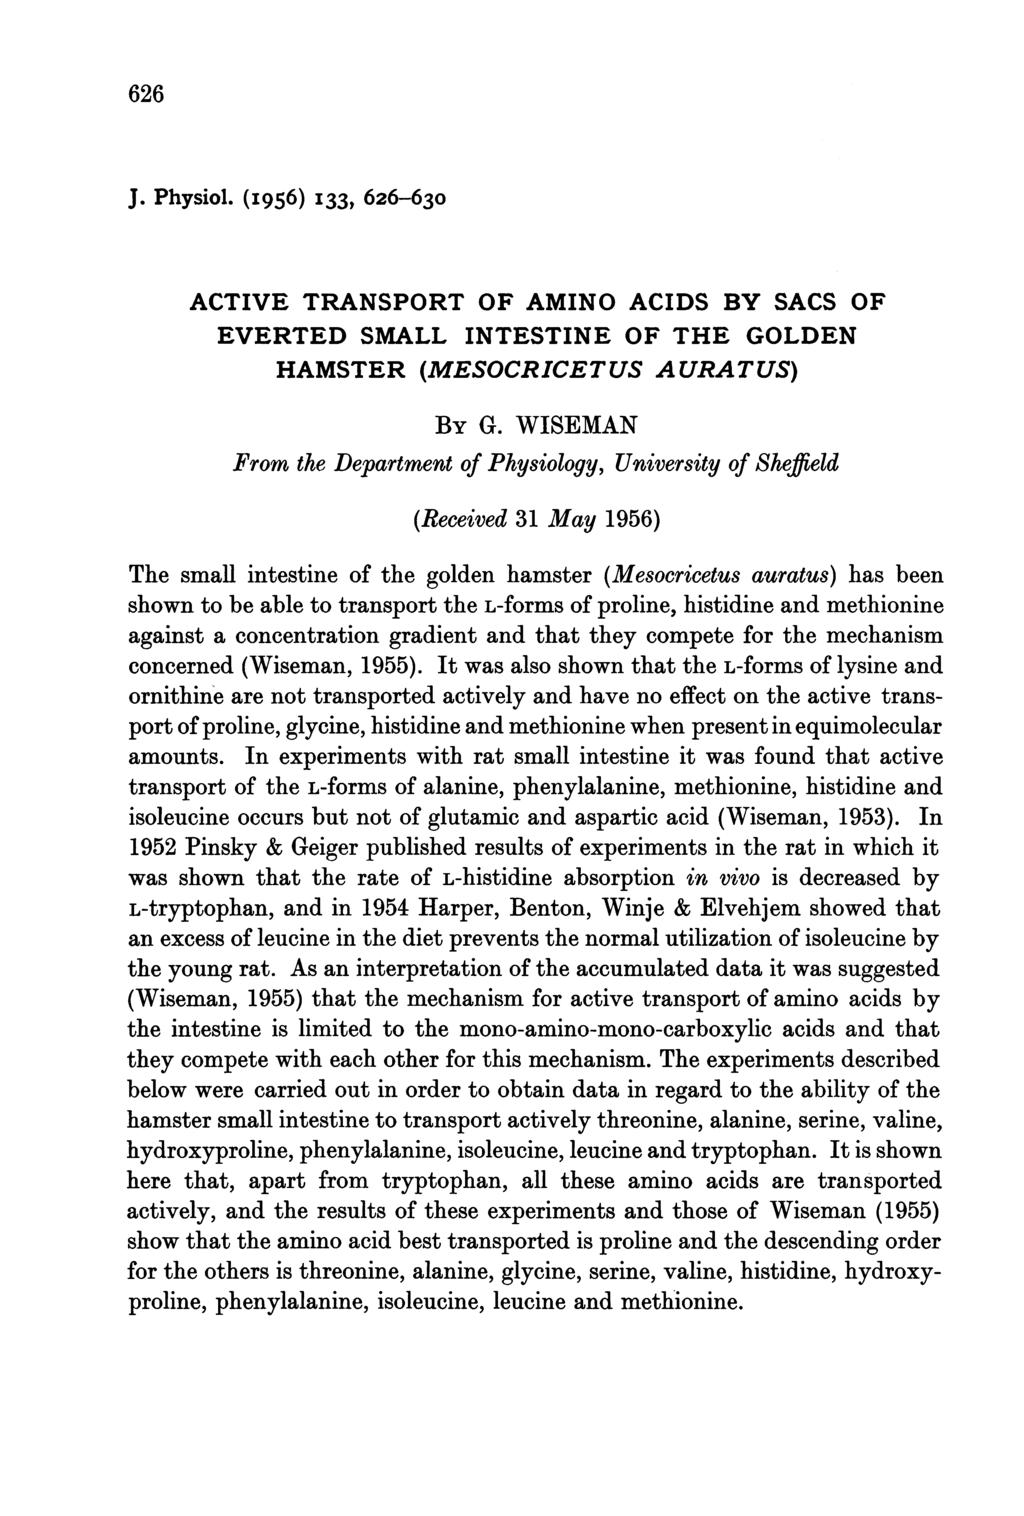 626 J. Physiol. (I956) I33, 626-630 ACTIVE TRANSPORT OF AMINO ACIDS BY SACS OF EVERTED SMALL INTESTINE OF THE GOLDEN HAMSTER (MESOCRICETUS AURATUS) BY G.